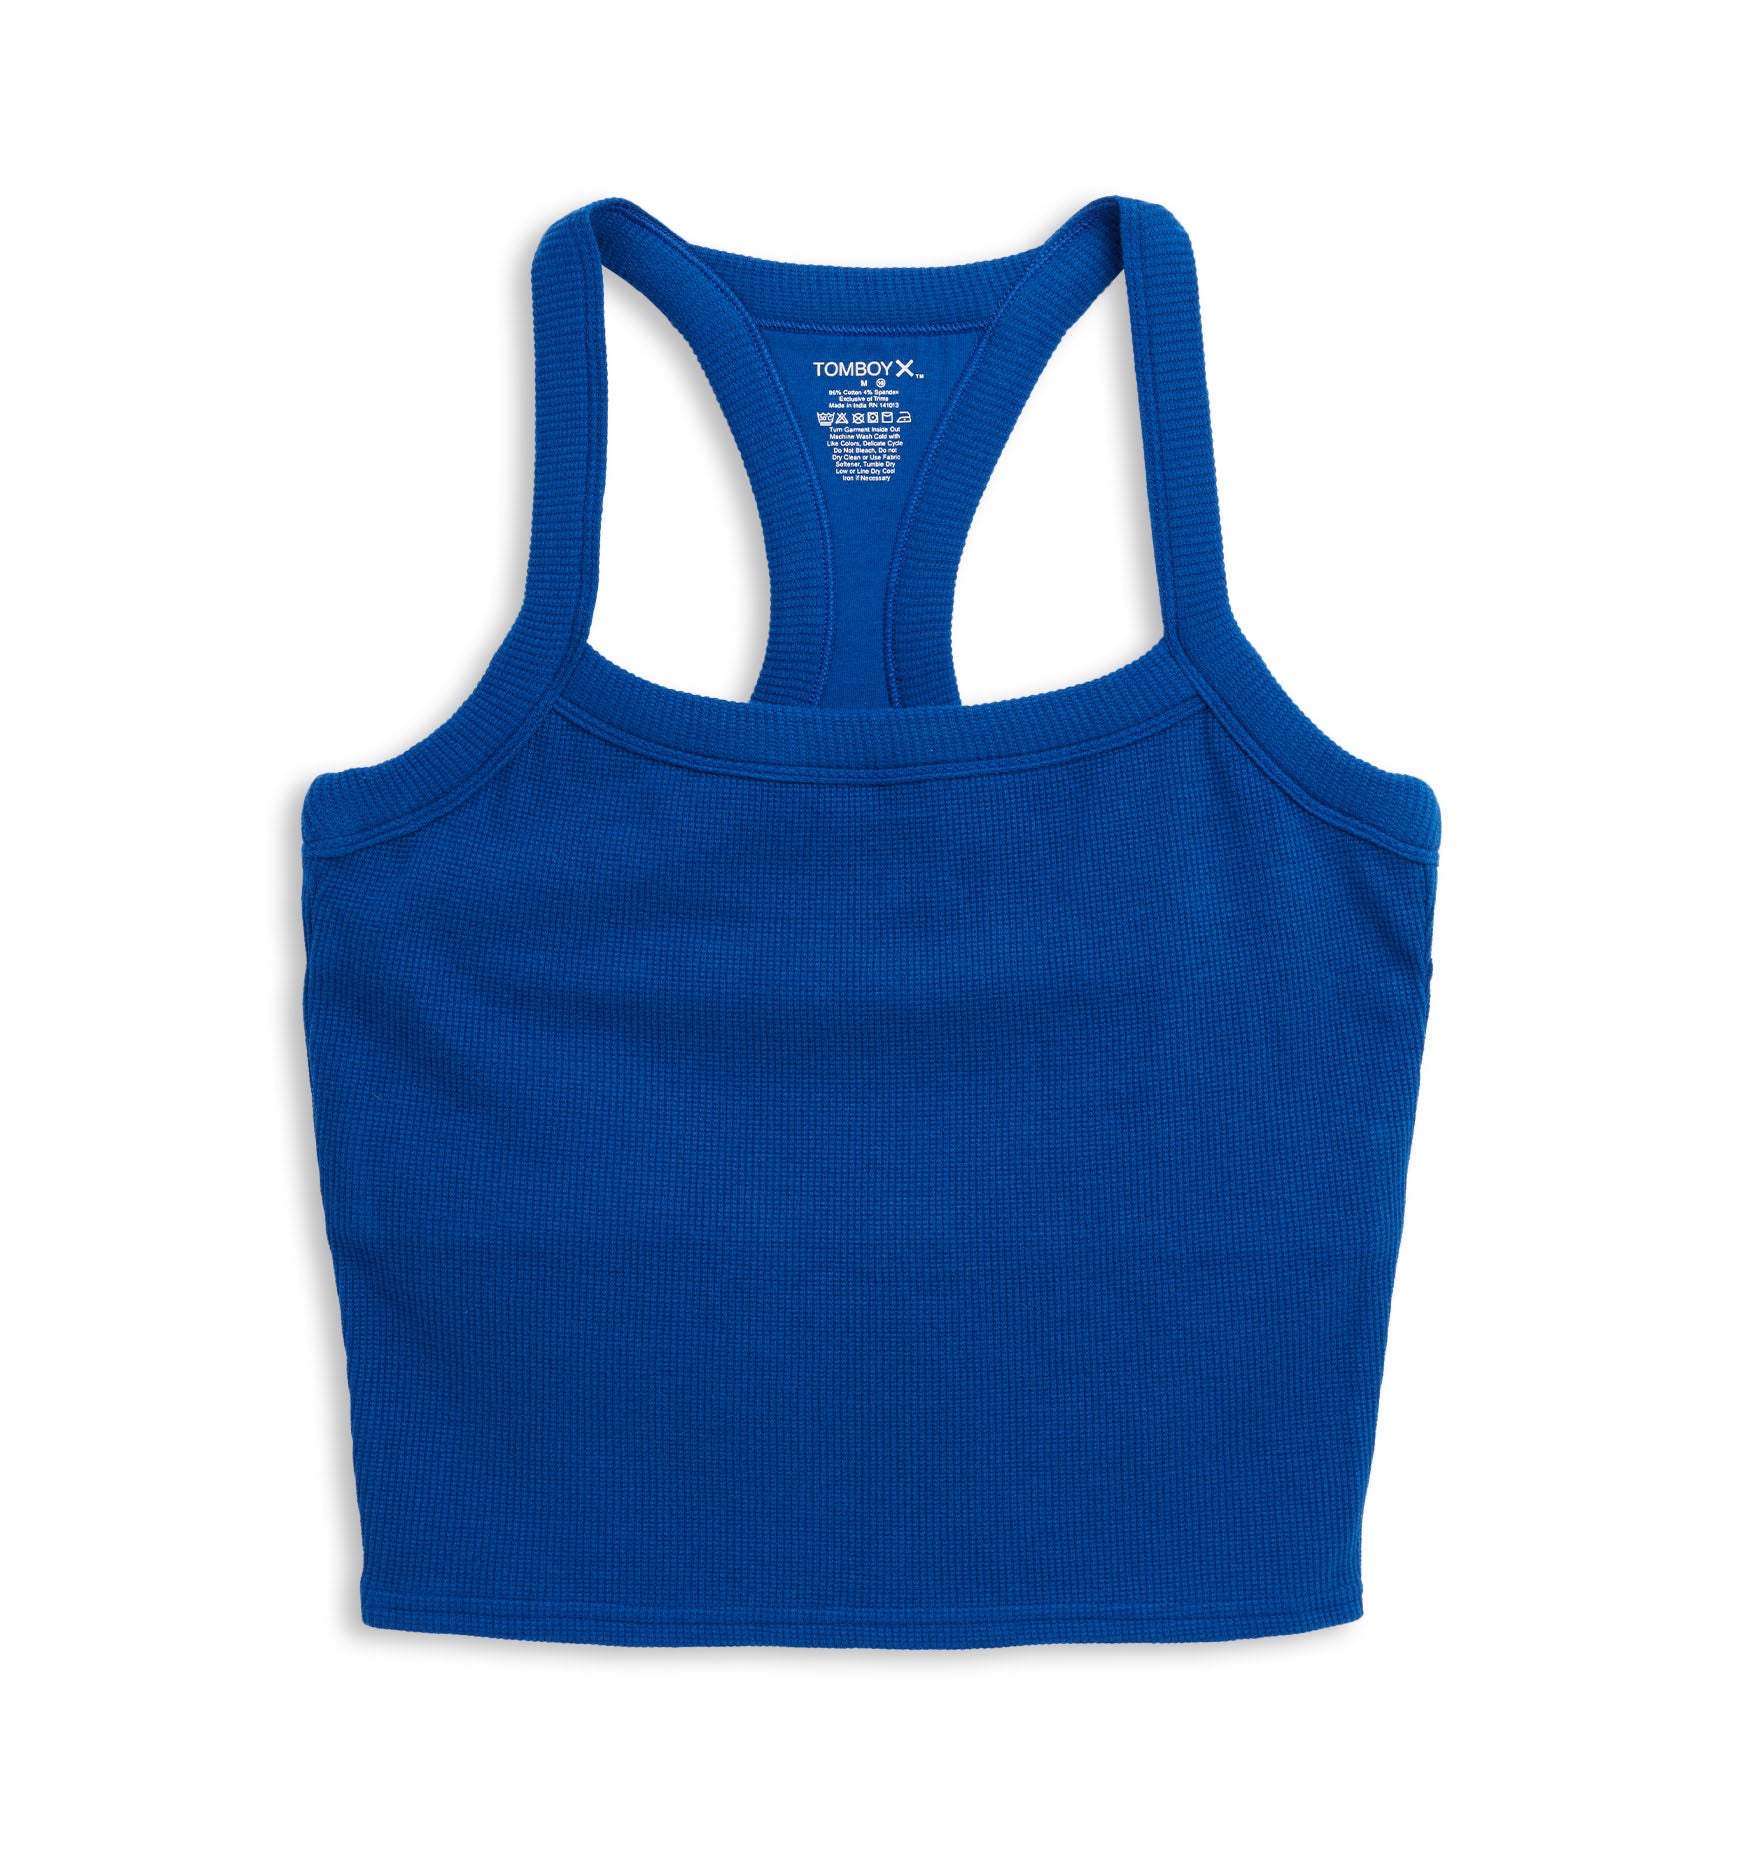 Women's Everyday Shelf Bra Cropped Camisole made with Organic Cotton